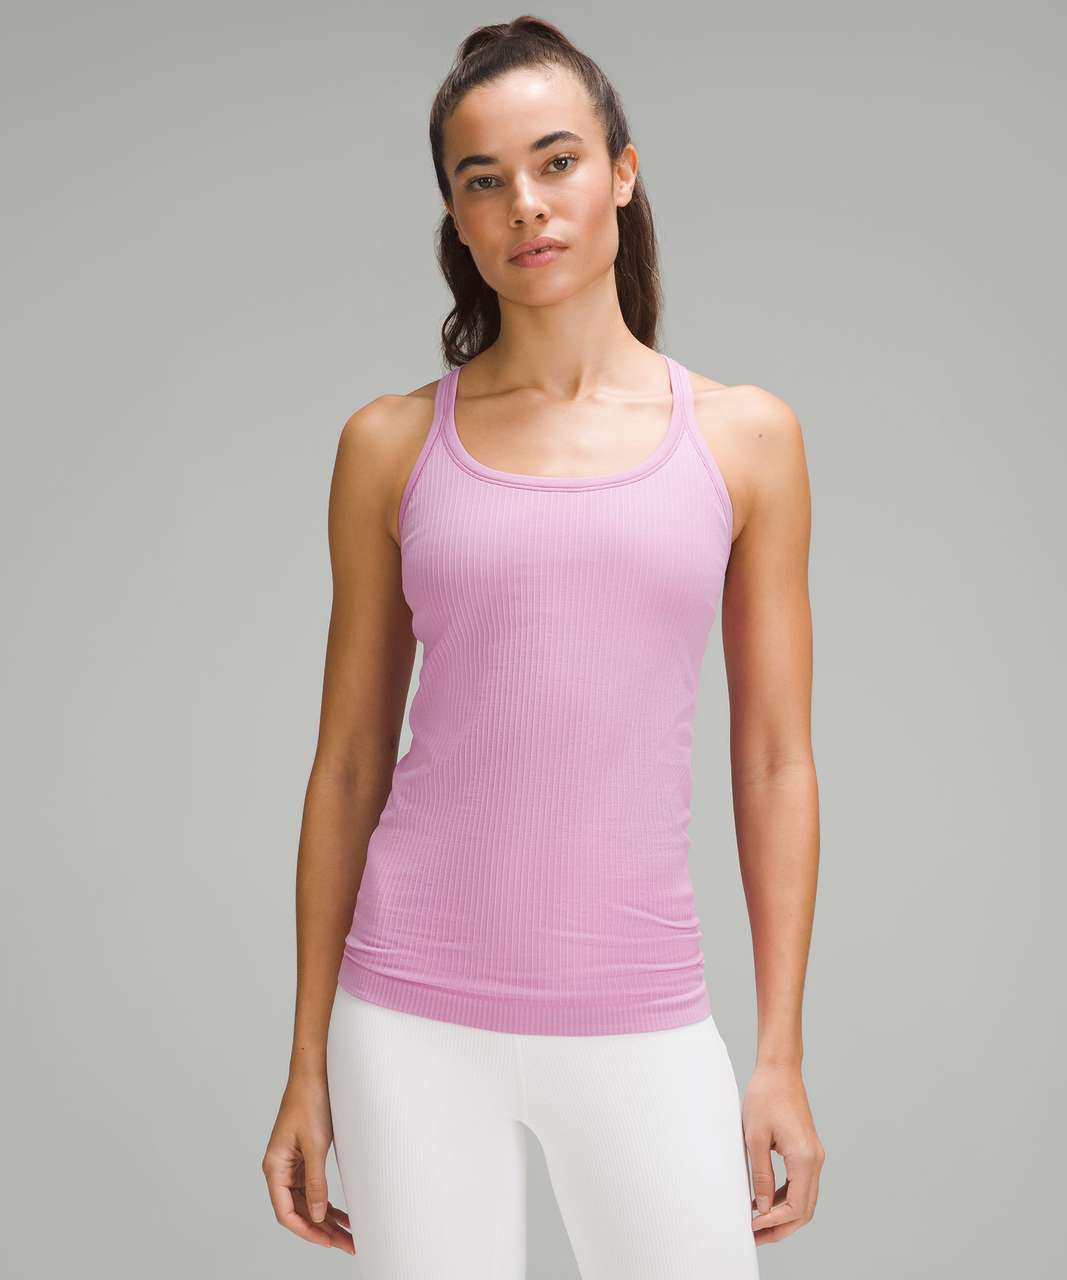 Green The Dylan Tank Top in Light Mauve – TULAROSA